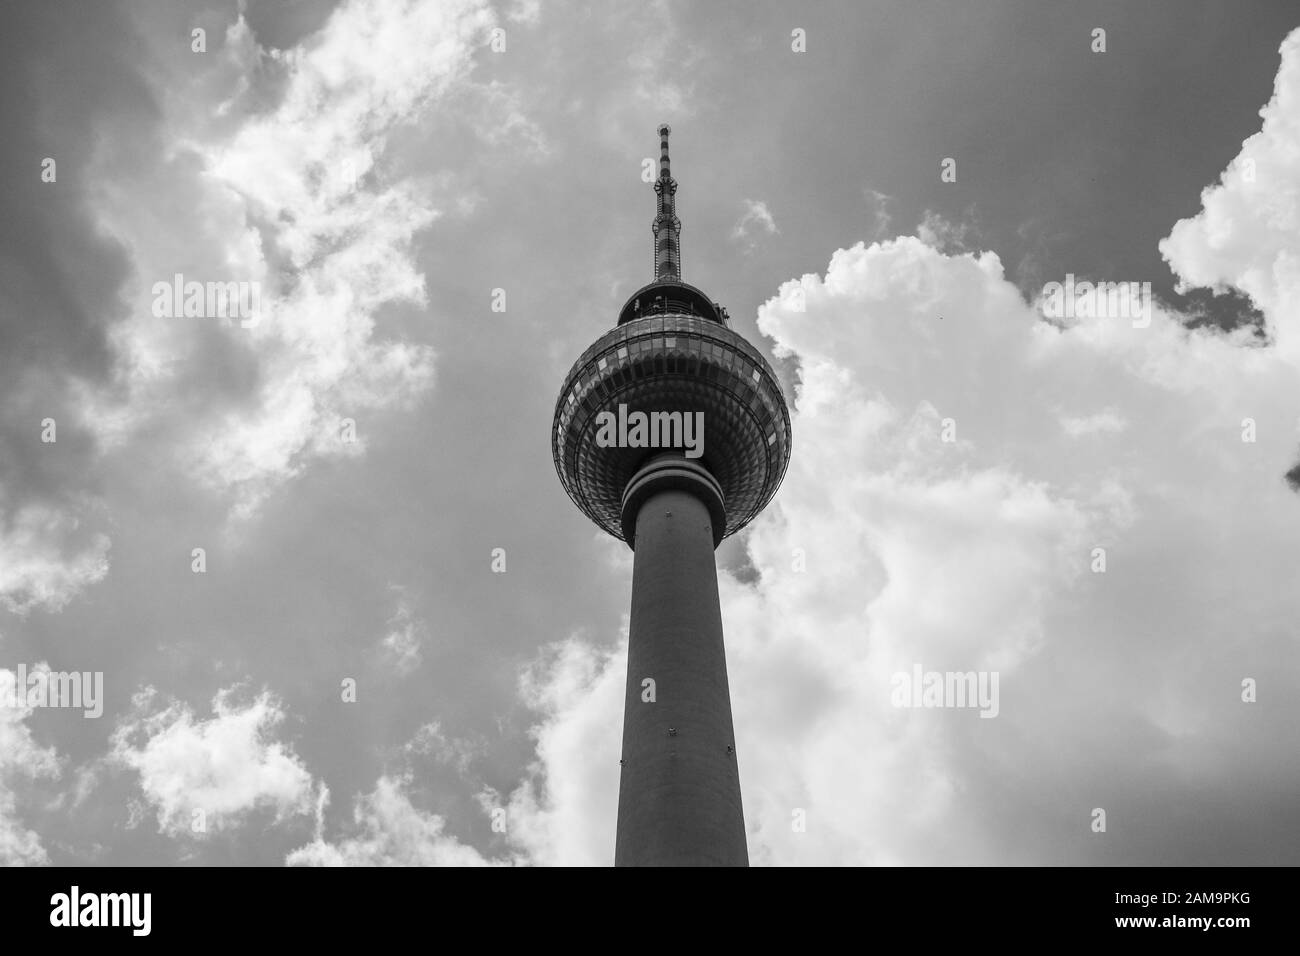 The detail of the famous TV tower in Berlin, one of the main sights of the city. Pictured against the cloudy sky in big contrast. Stock Photo